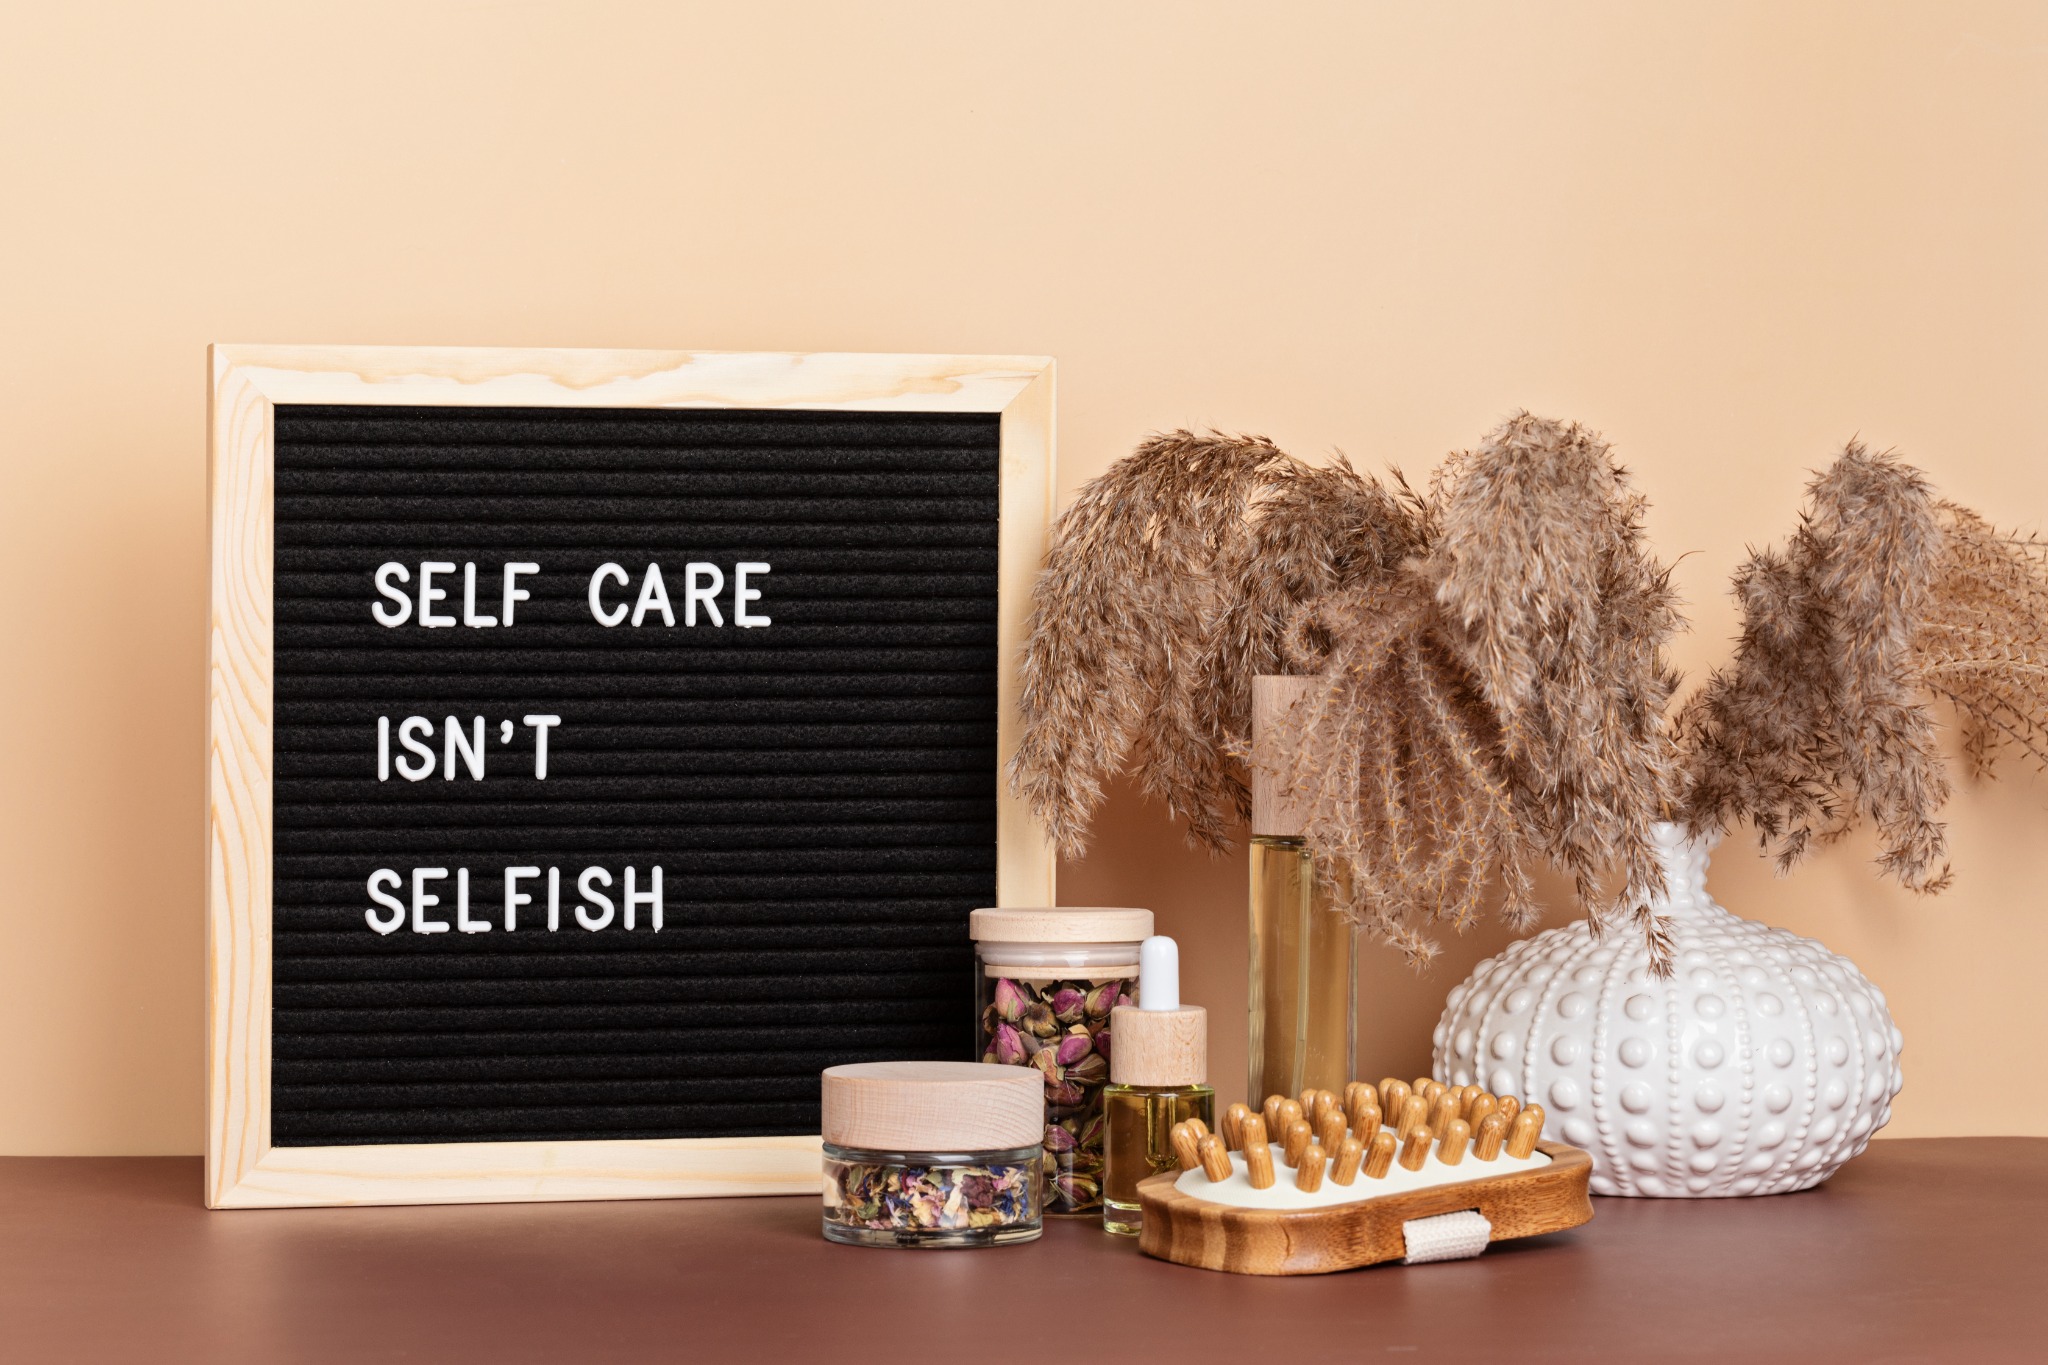 Image of self-care items next to a felt sign with the words "self-care isn't selfish"